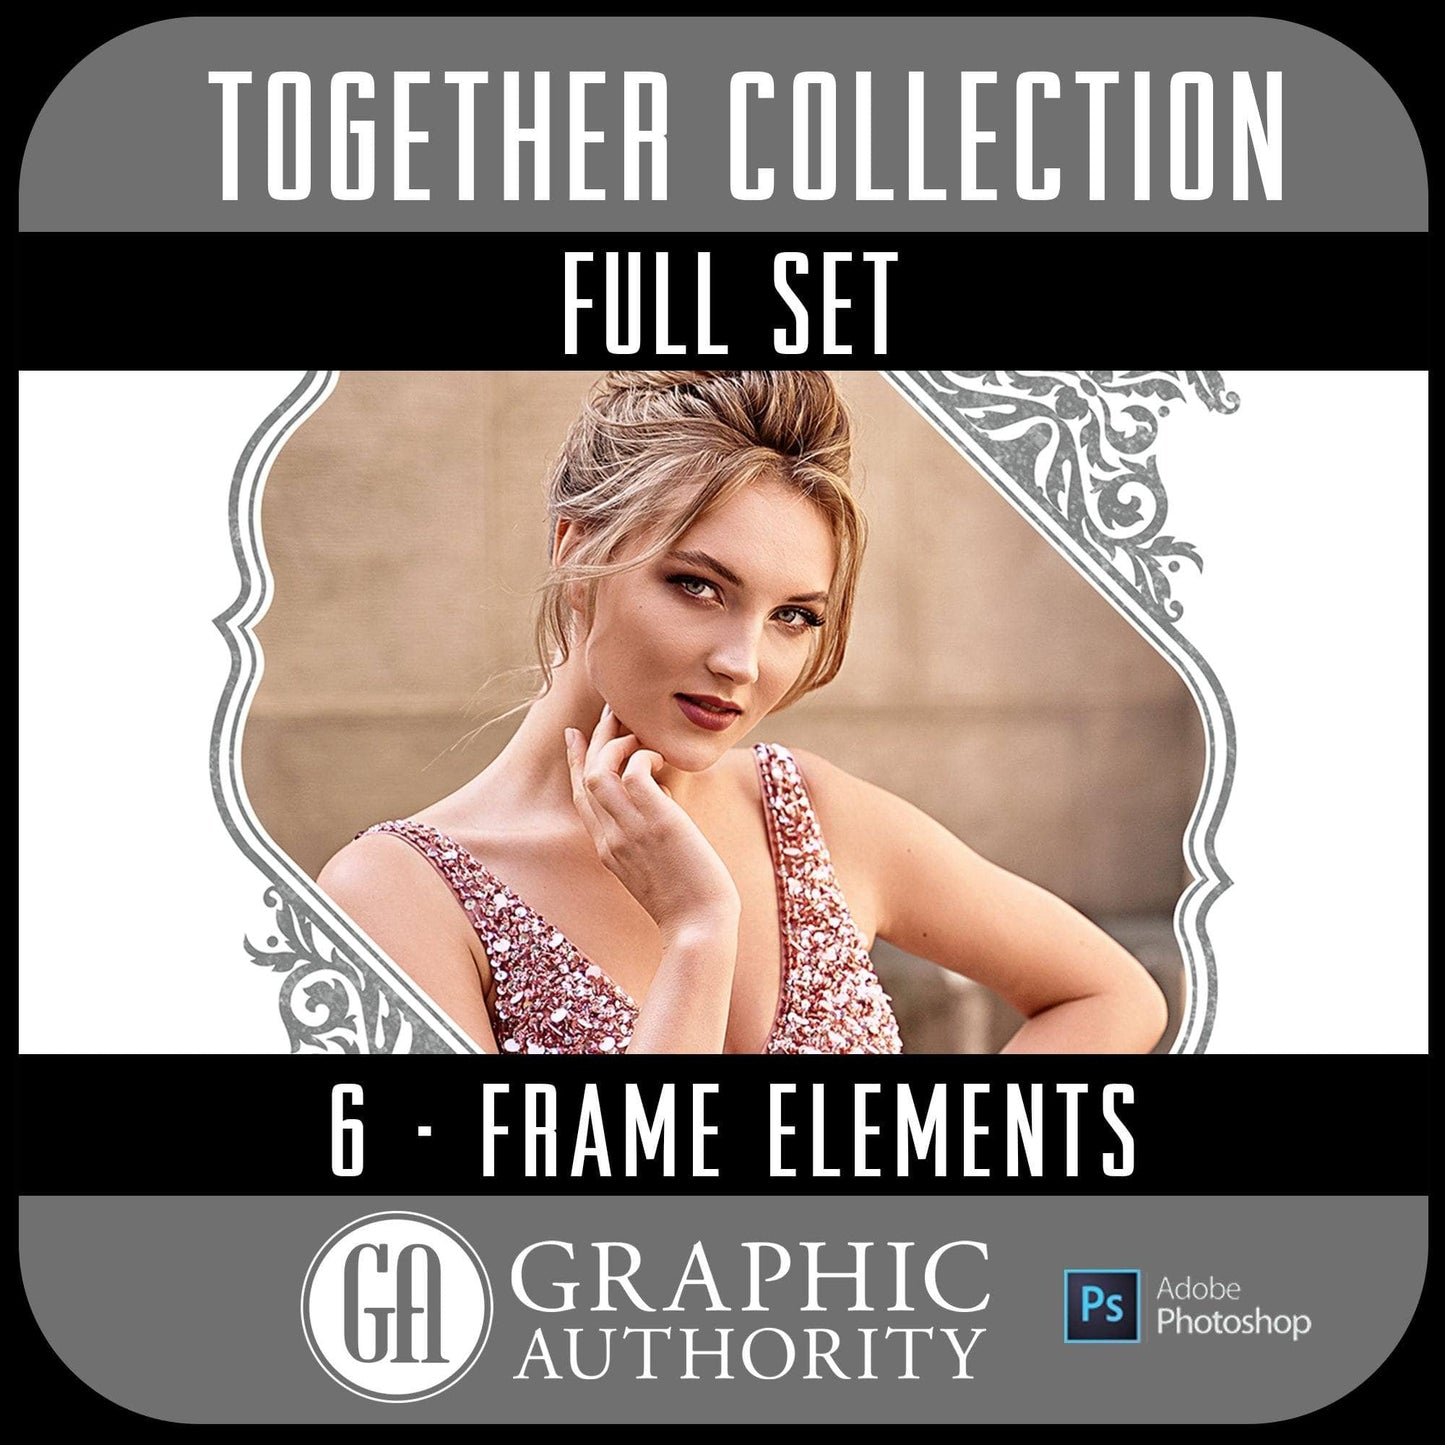 Together Full Collection - Full Set- 6 Frames-Photoshop Template - Graphic Authority